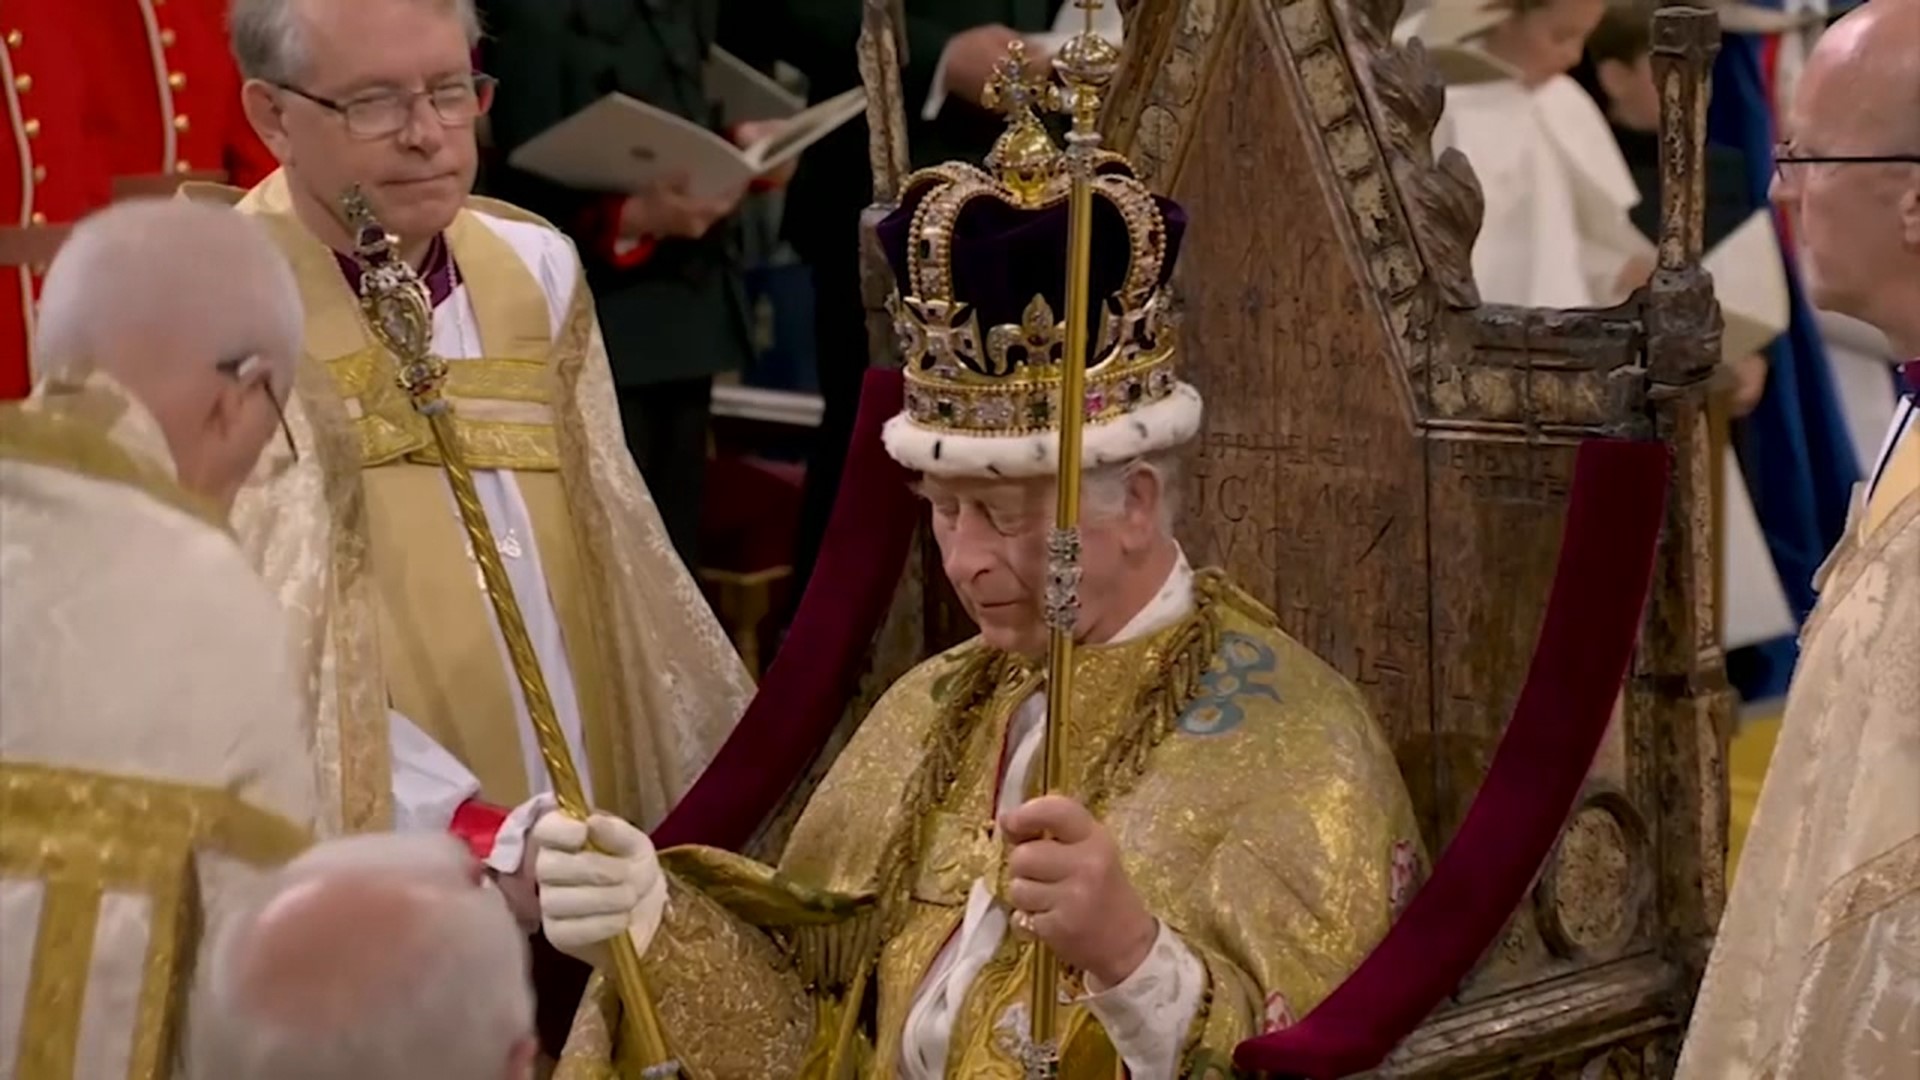 The ceremony drew thousands wanting to pay tribute to Britain's new monarch.